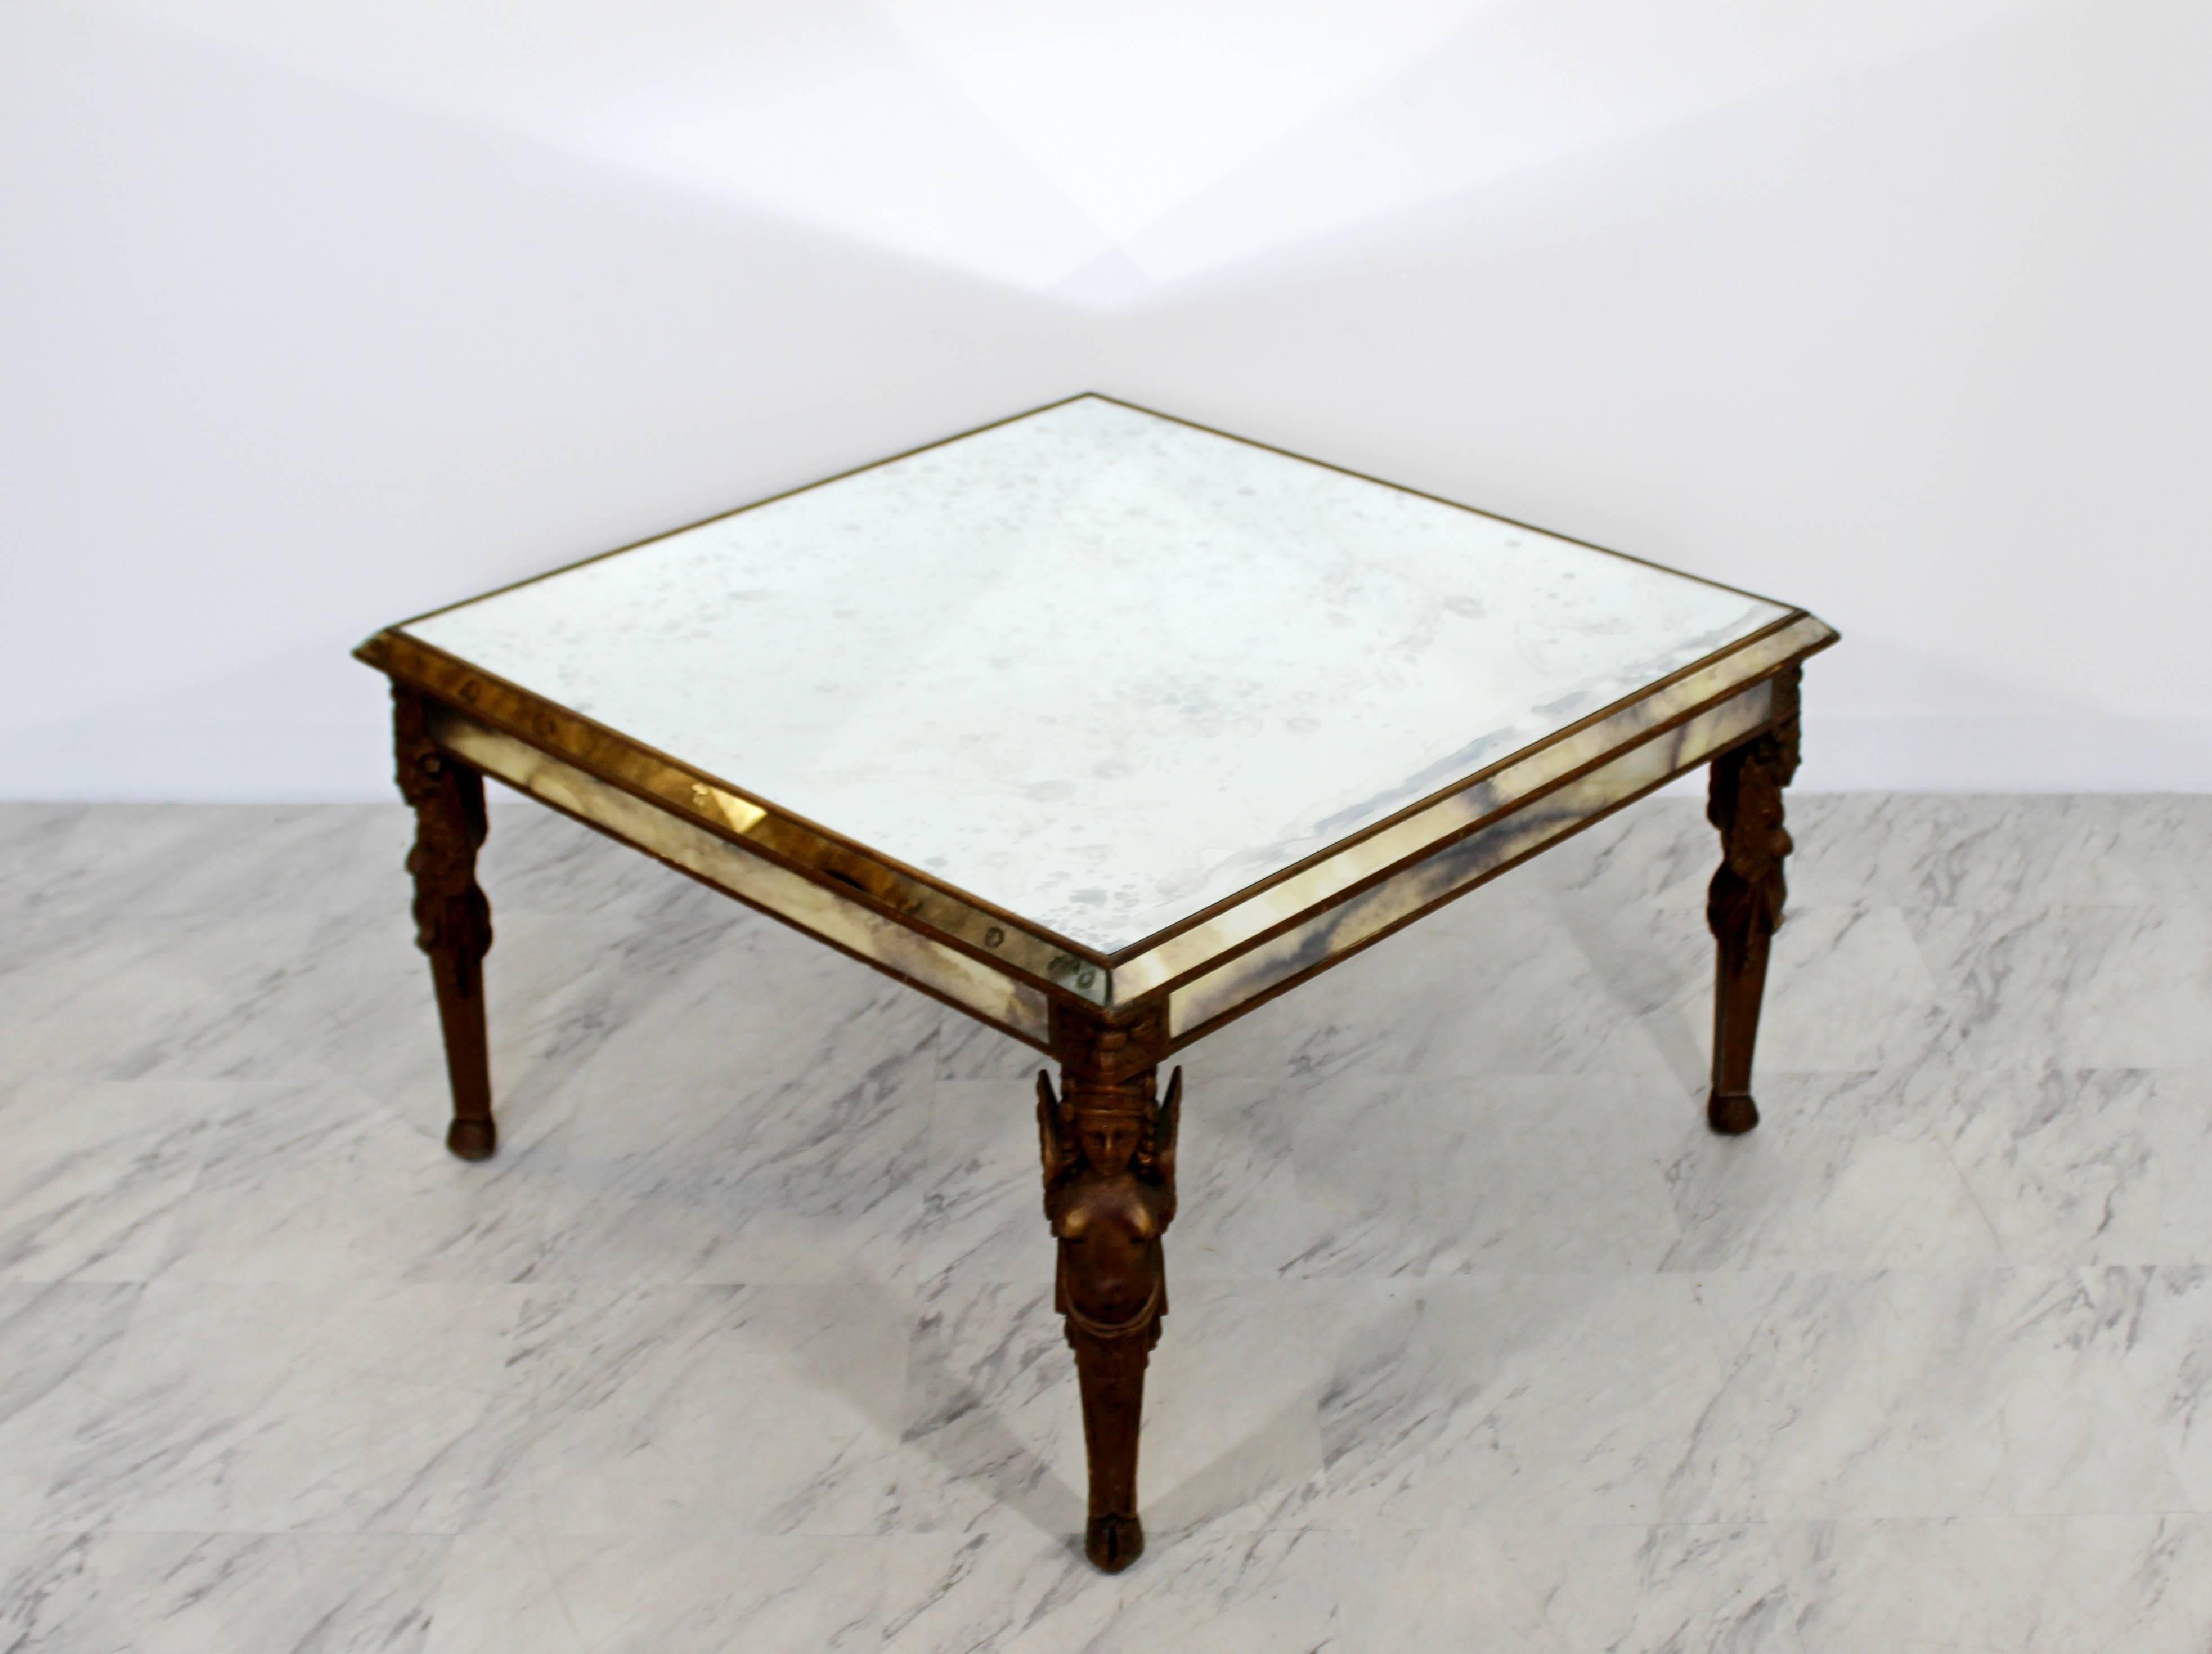 For your consideration is an intricately carved Art Deco wooden coffee table, with carved angels on the legs. Antique smoked mirrored glass top. In great condition. The dimensions are 32